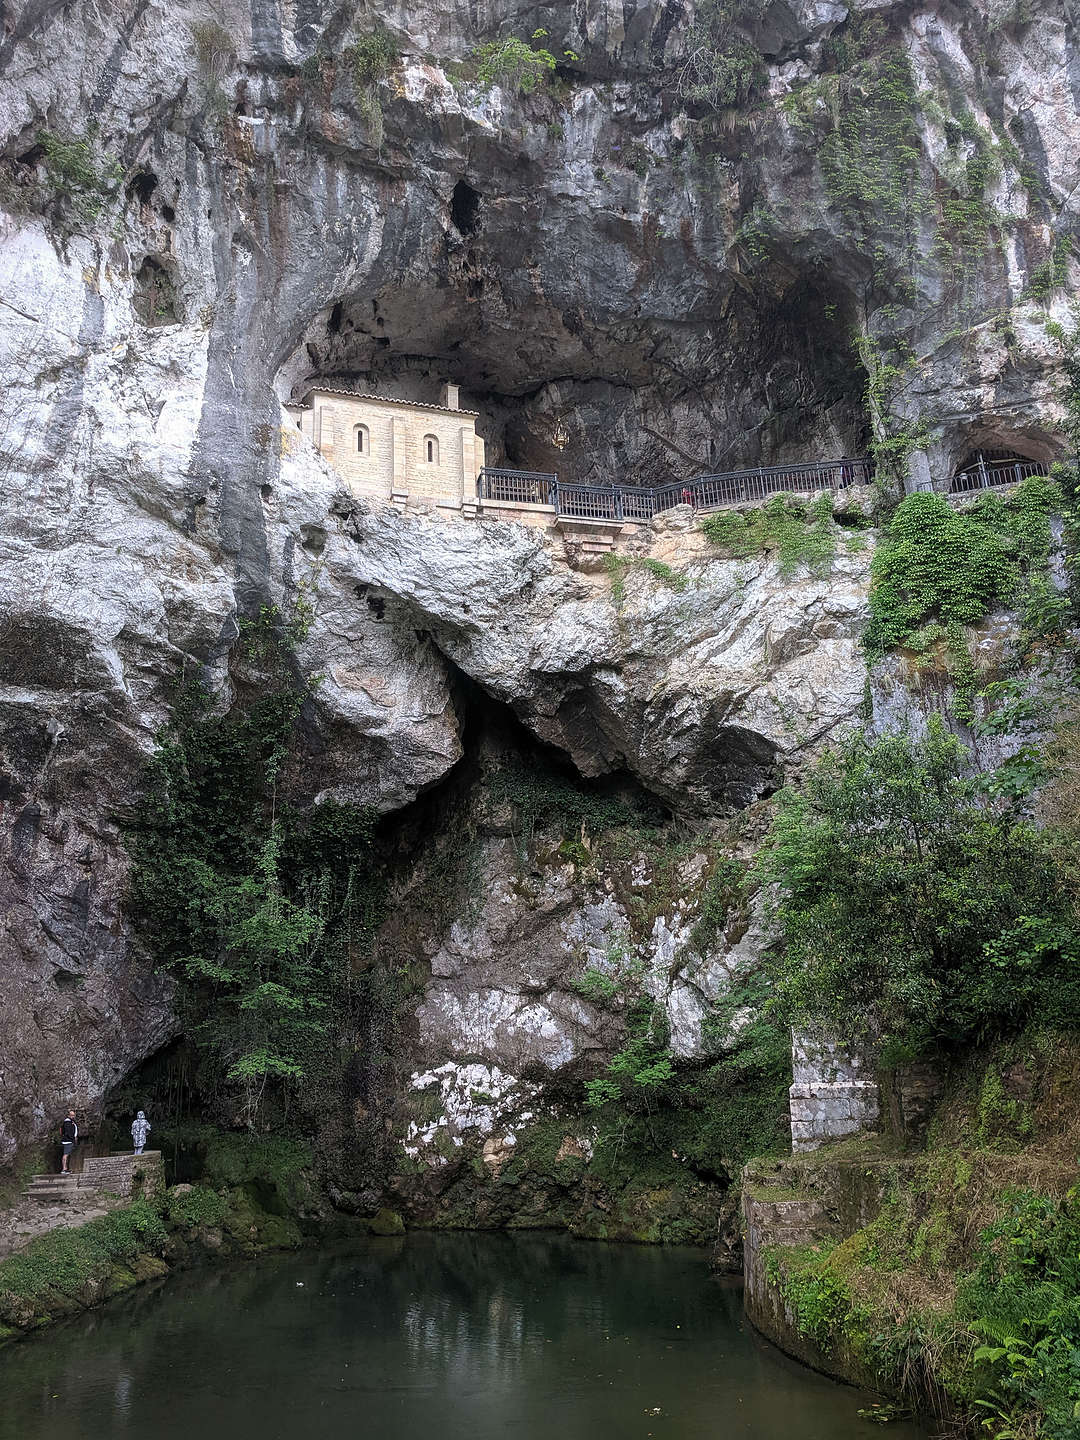 Santa Cueva, a hillside cave where, according to legend, the Virgin Mary appeared in 722 AD